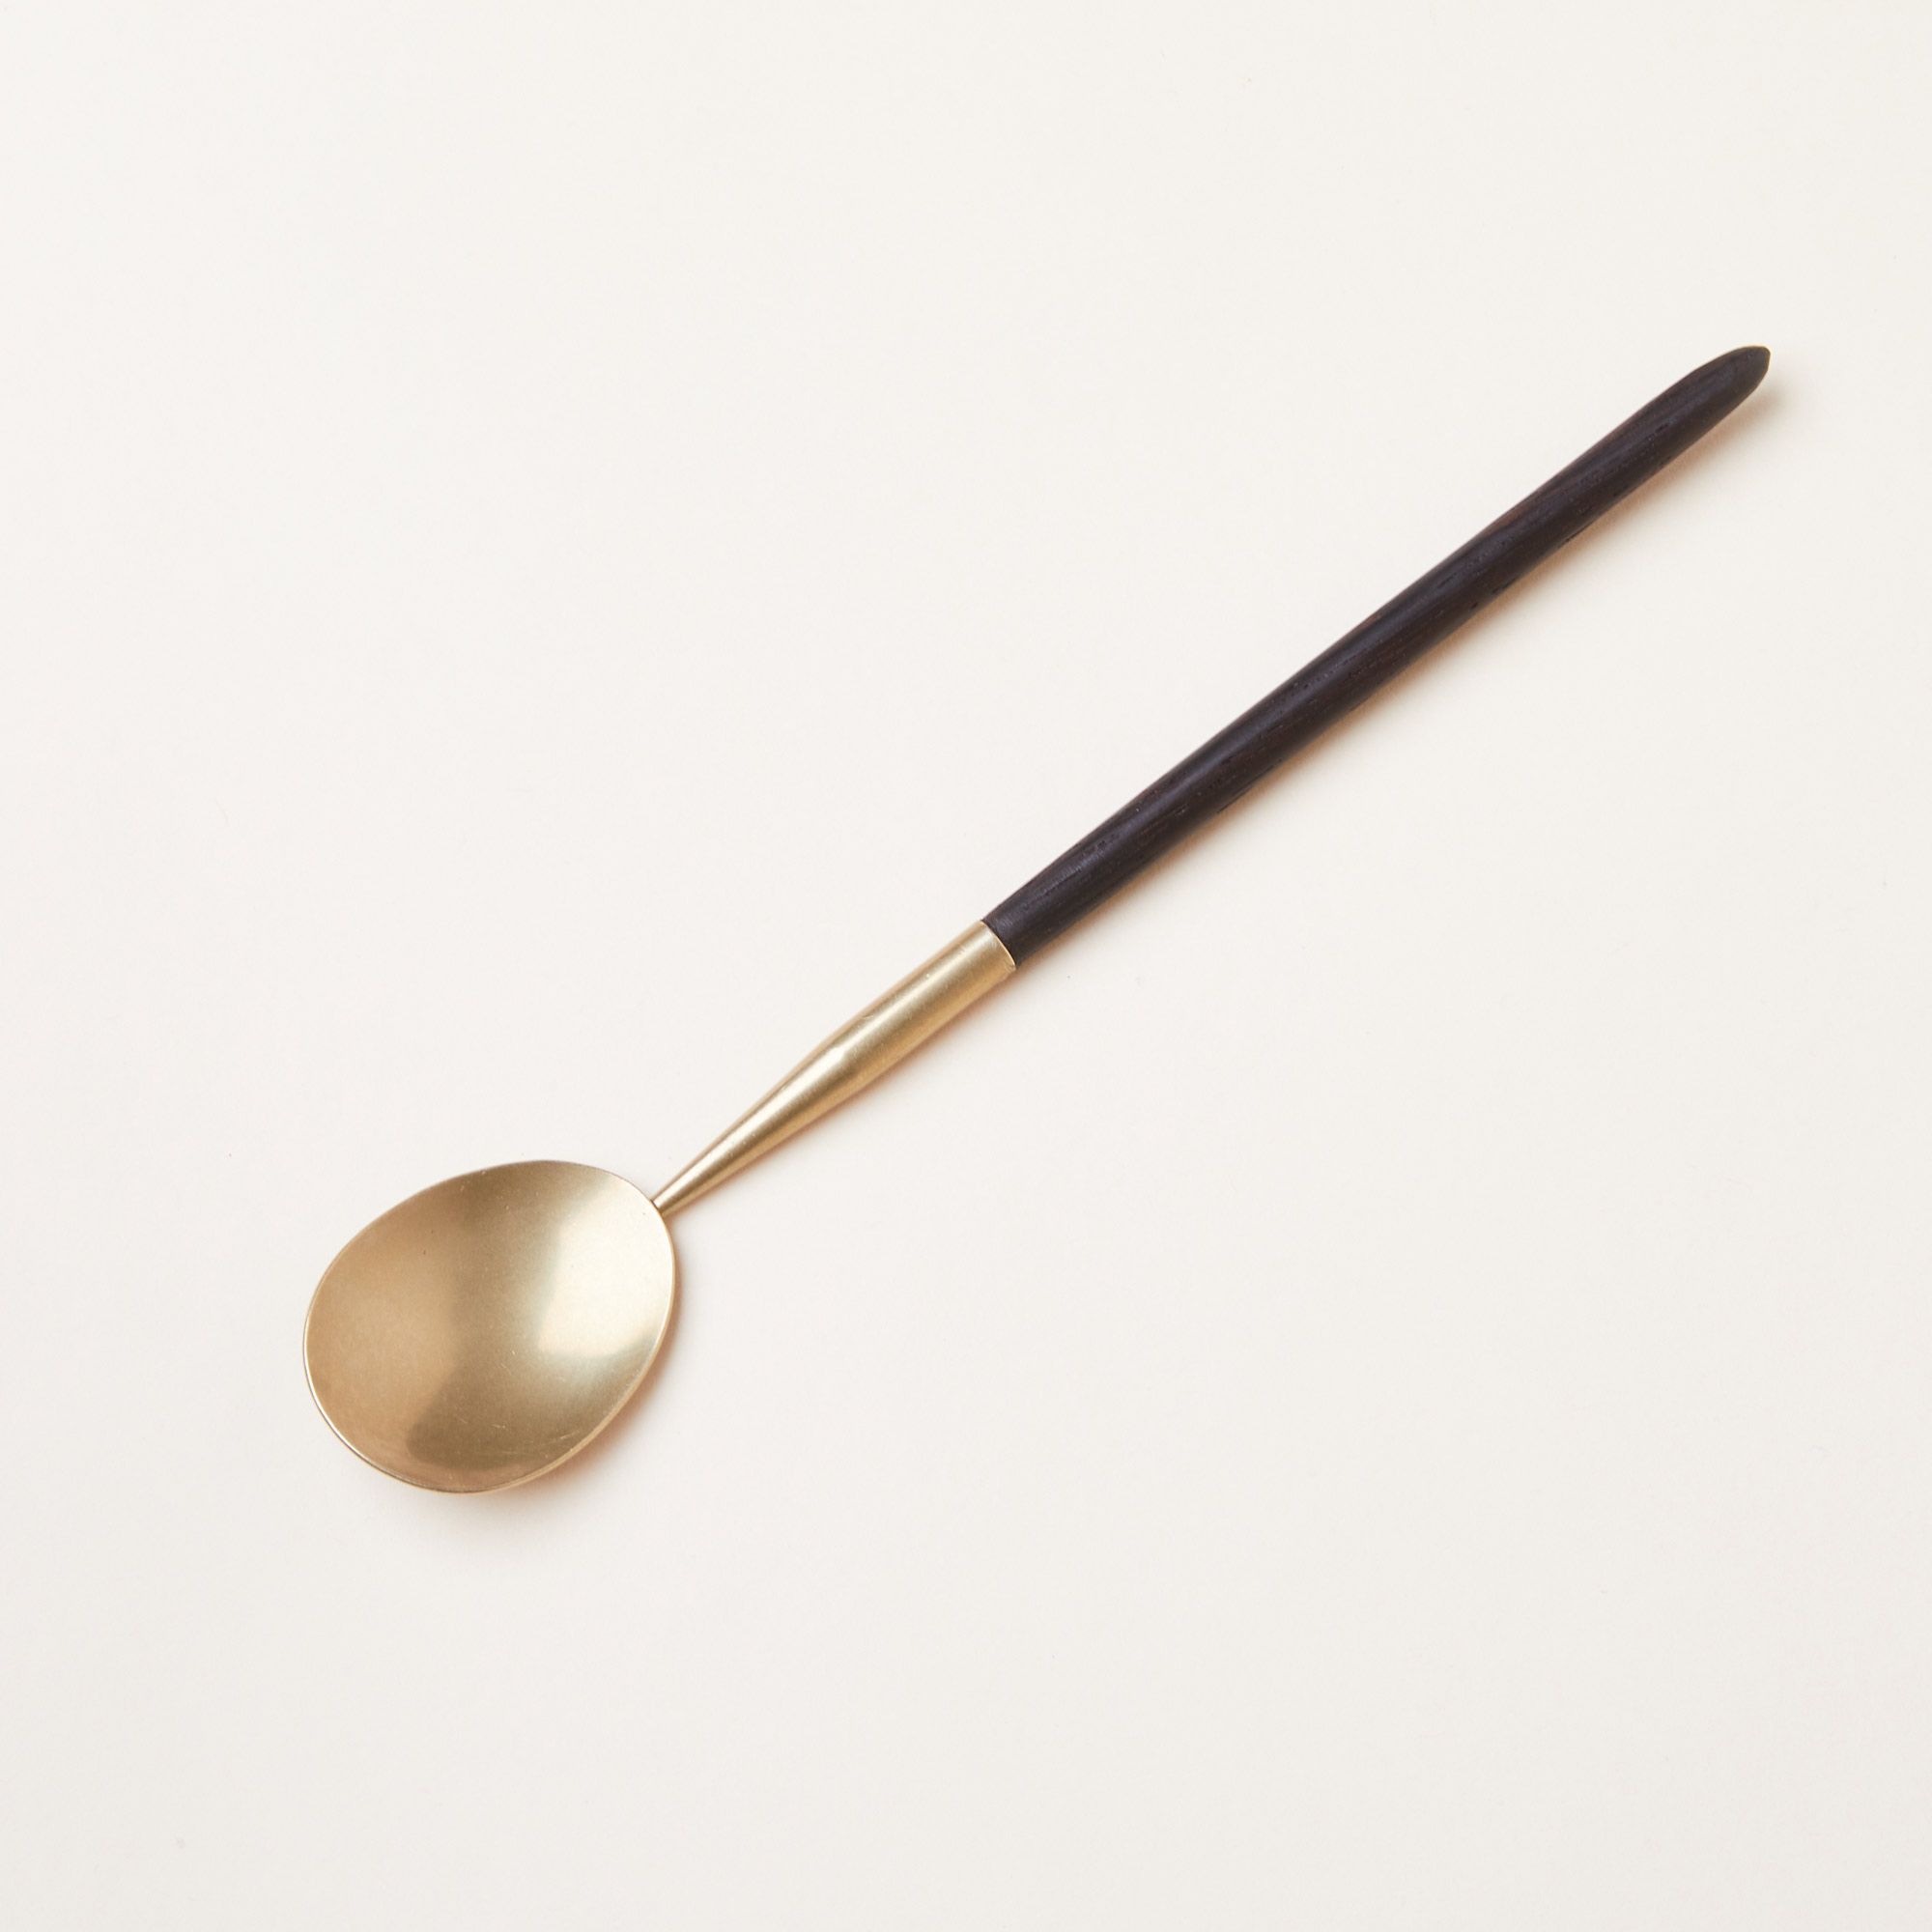 A long-handled spoon with brass ferrule and bowl